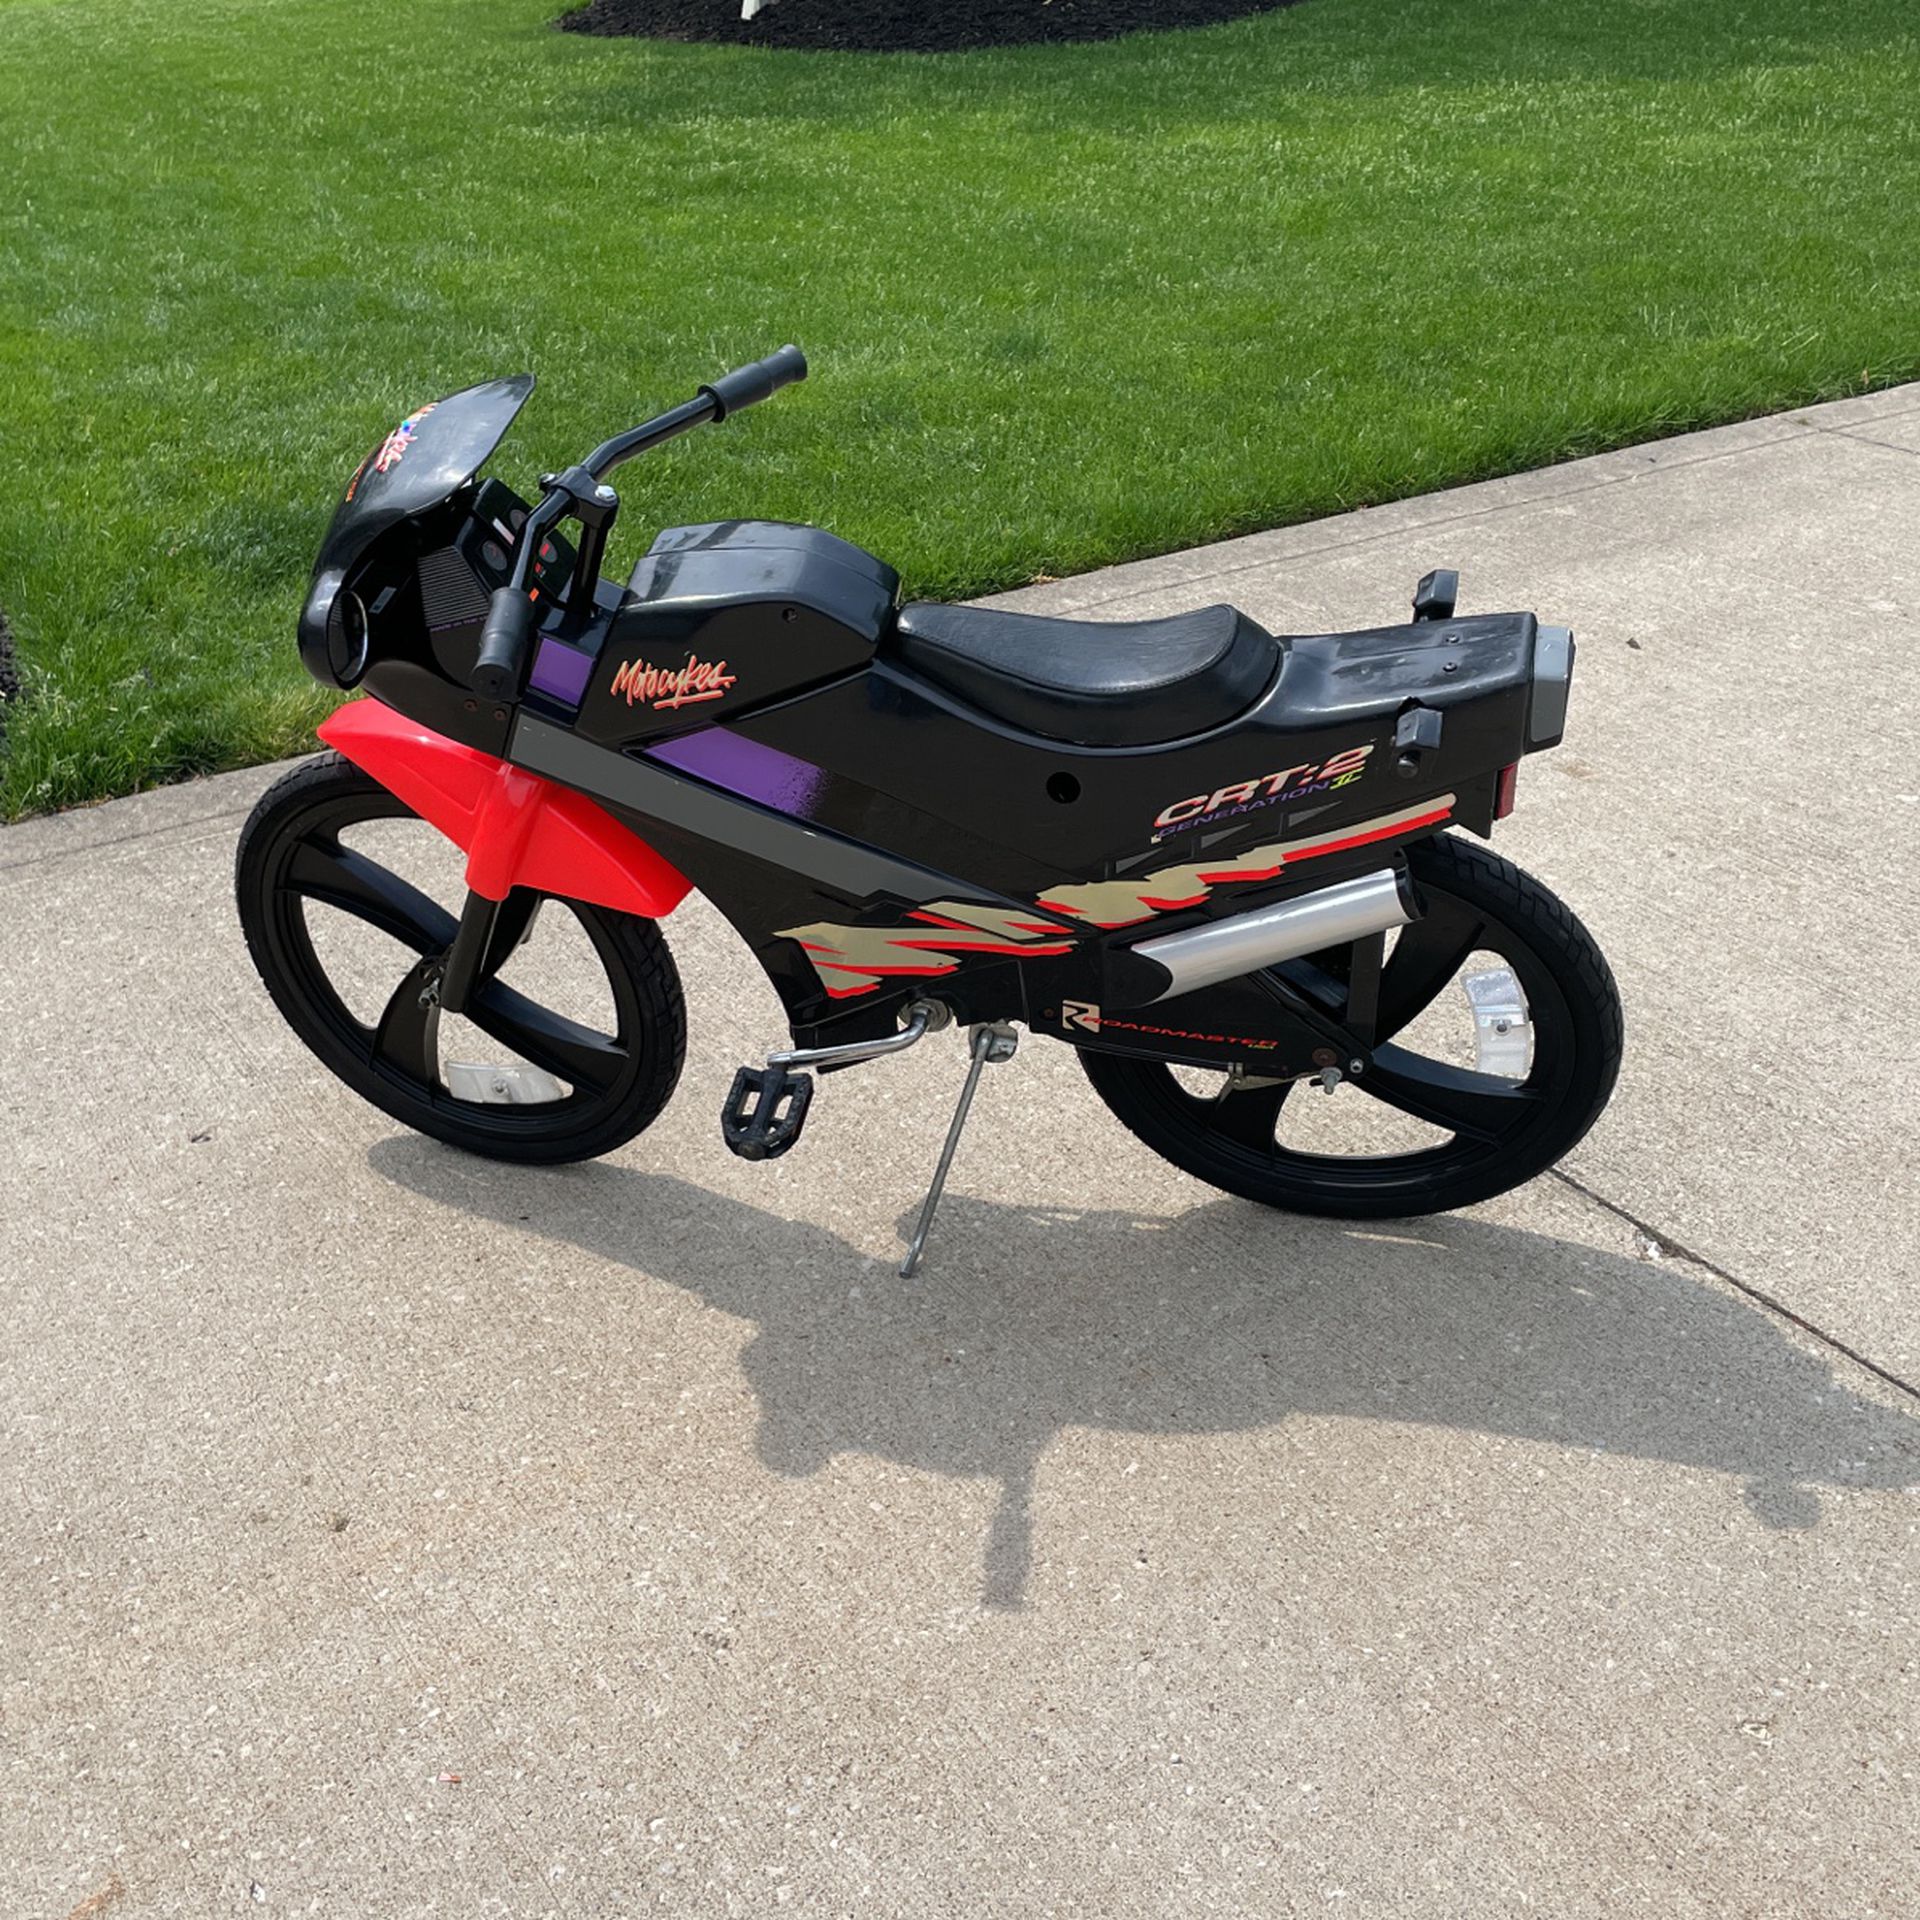 Kids Motorcycle Pedal bike for Sale in North Royalton, OH - OfferUp